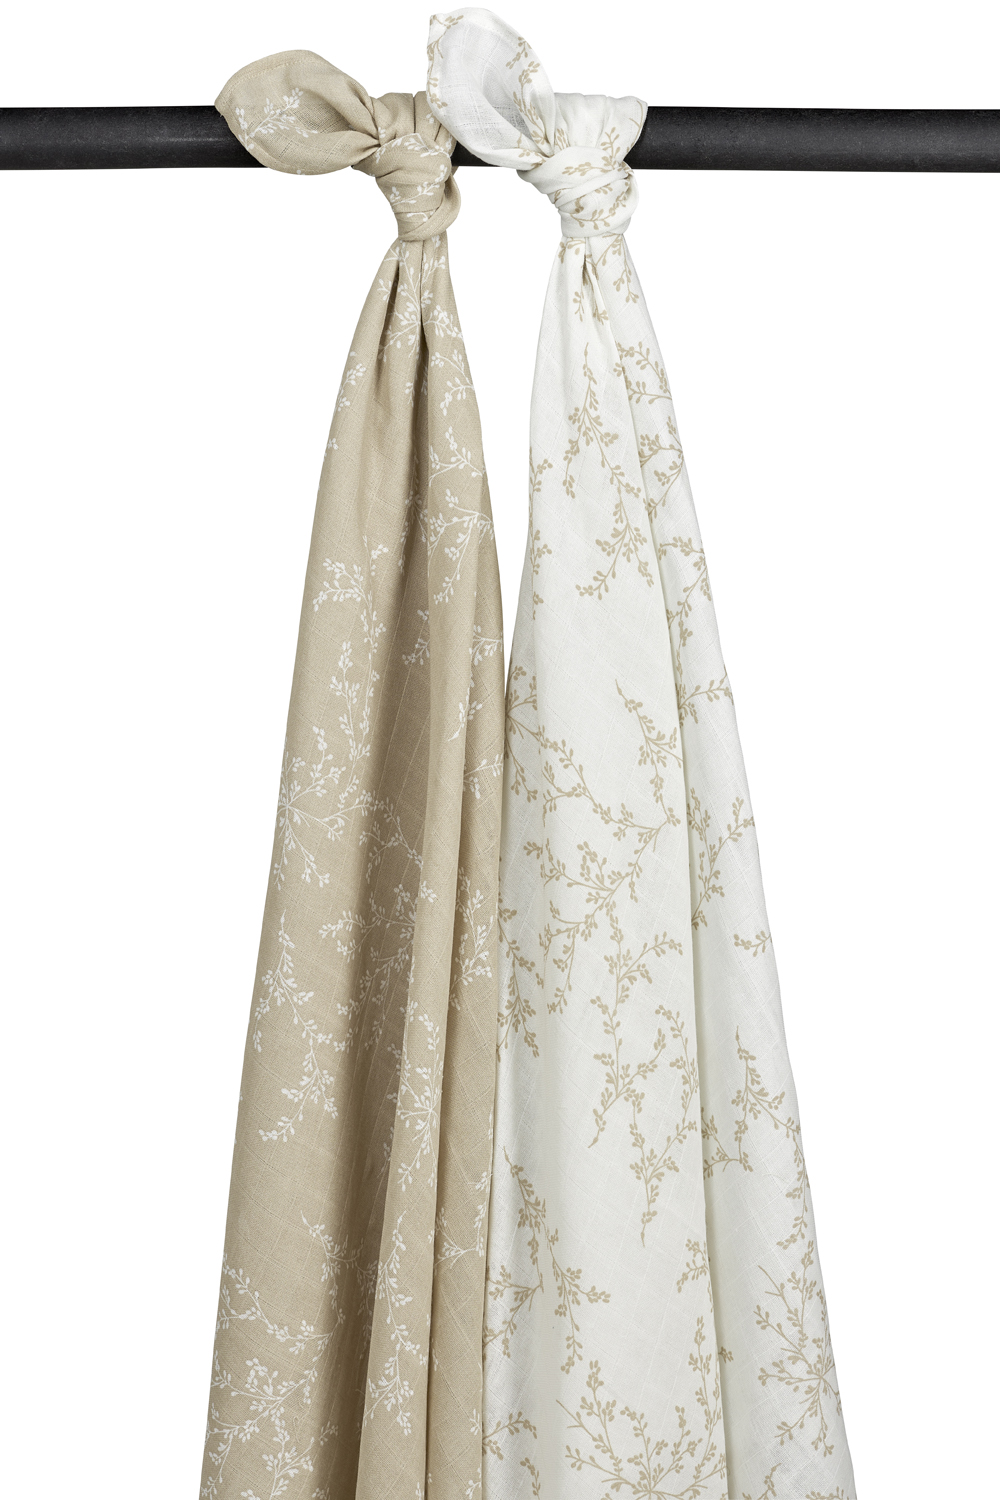 Swaddle  2er pack musselin Branches - sand - 120x120cm